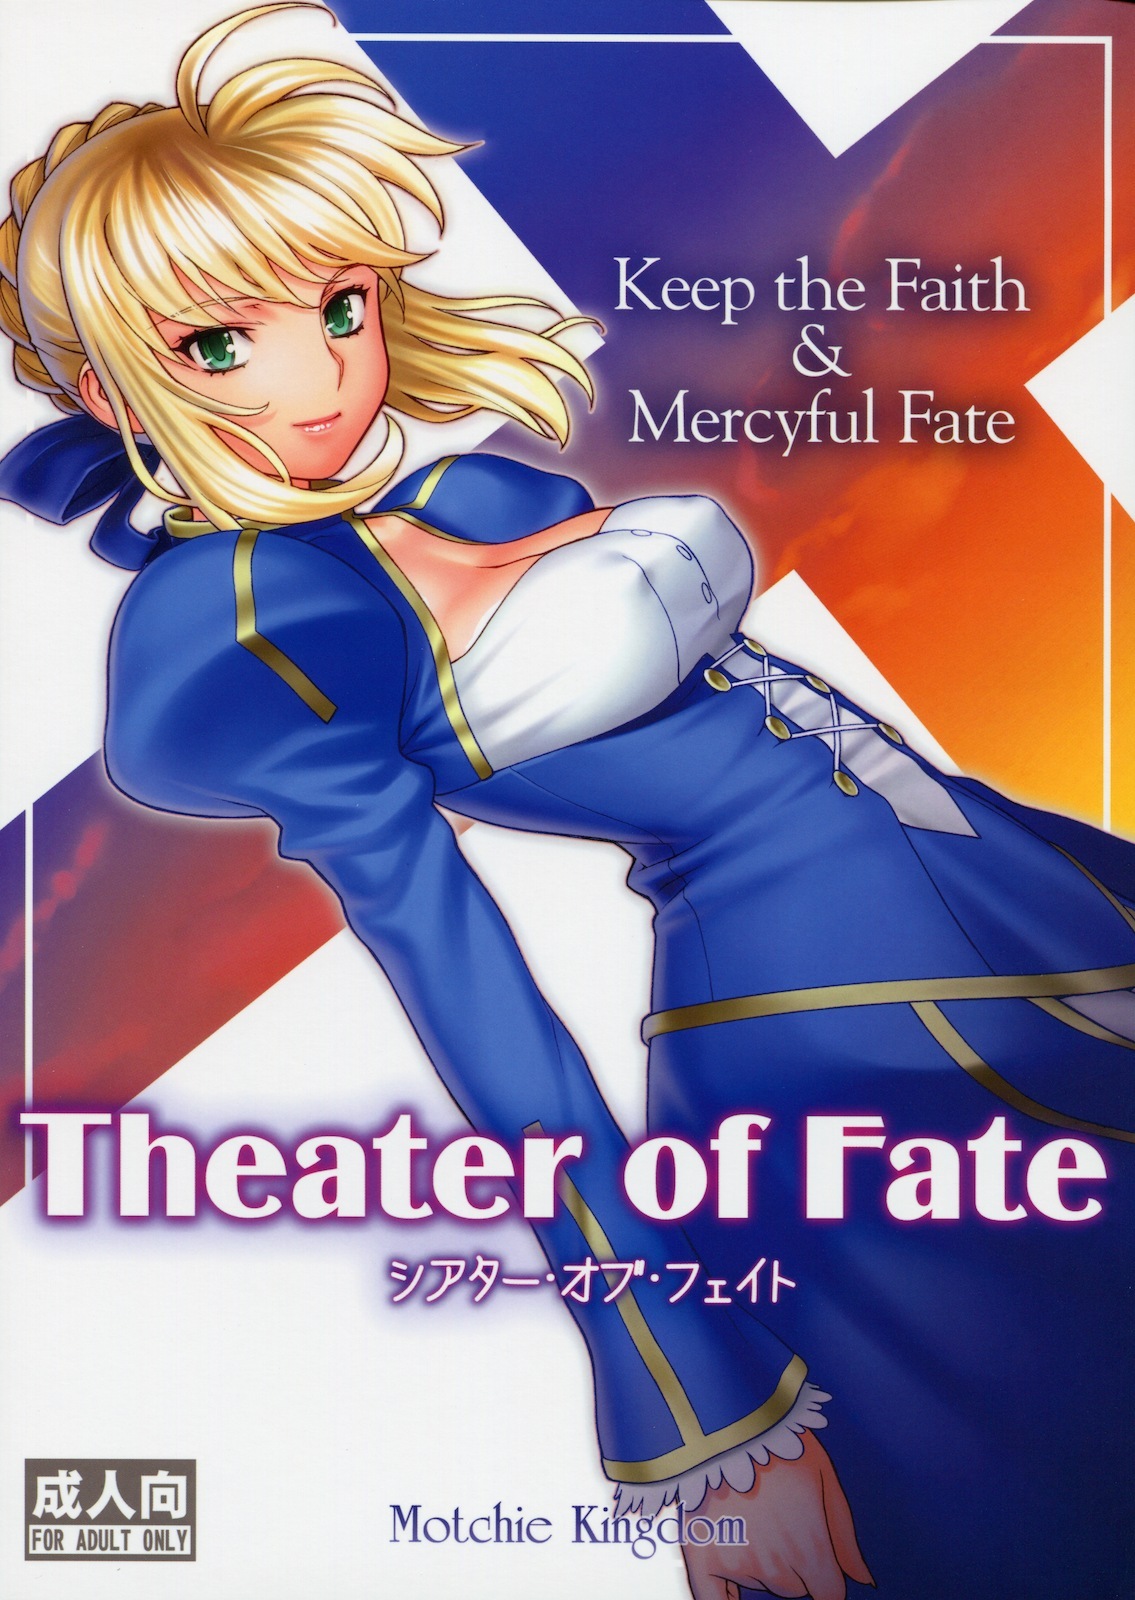 [Motchie Kingdom (Motchie)] Theater of Fate (Fate/stay night) page 1 full